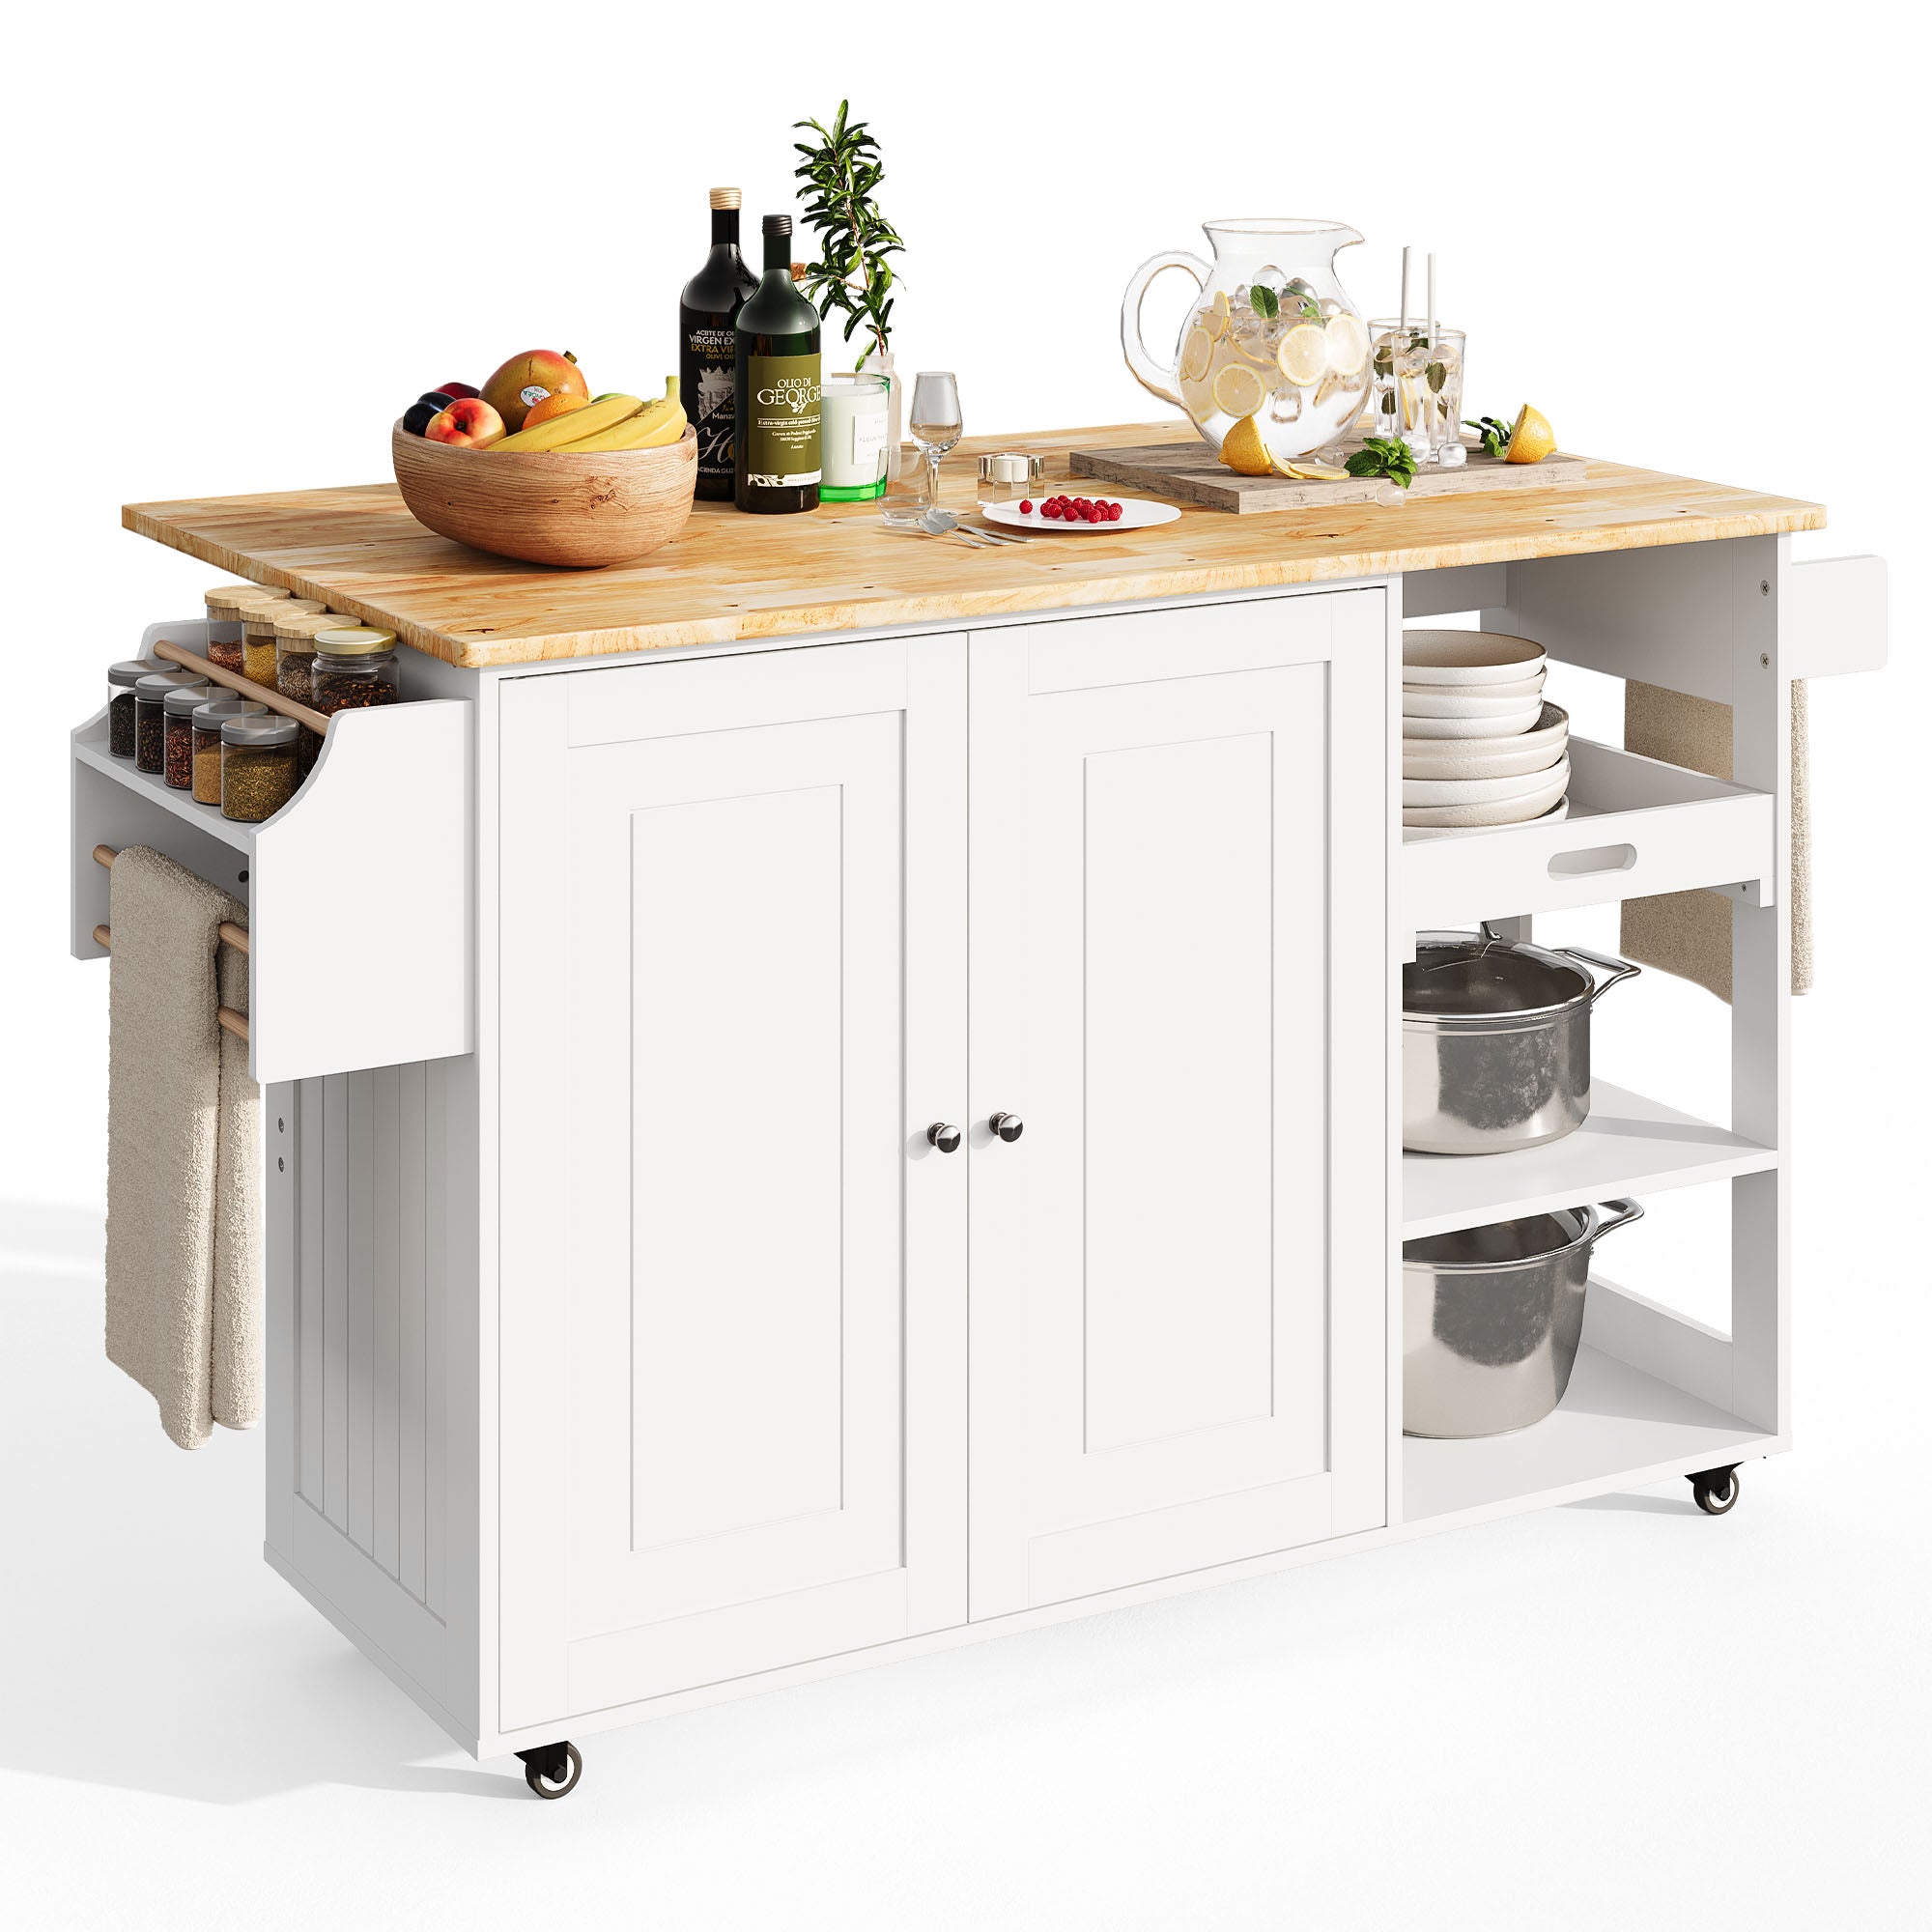 Gizoon KC70 51" Rolling Kitchen Island with Drop Leaf and Adjustable Shelf